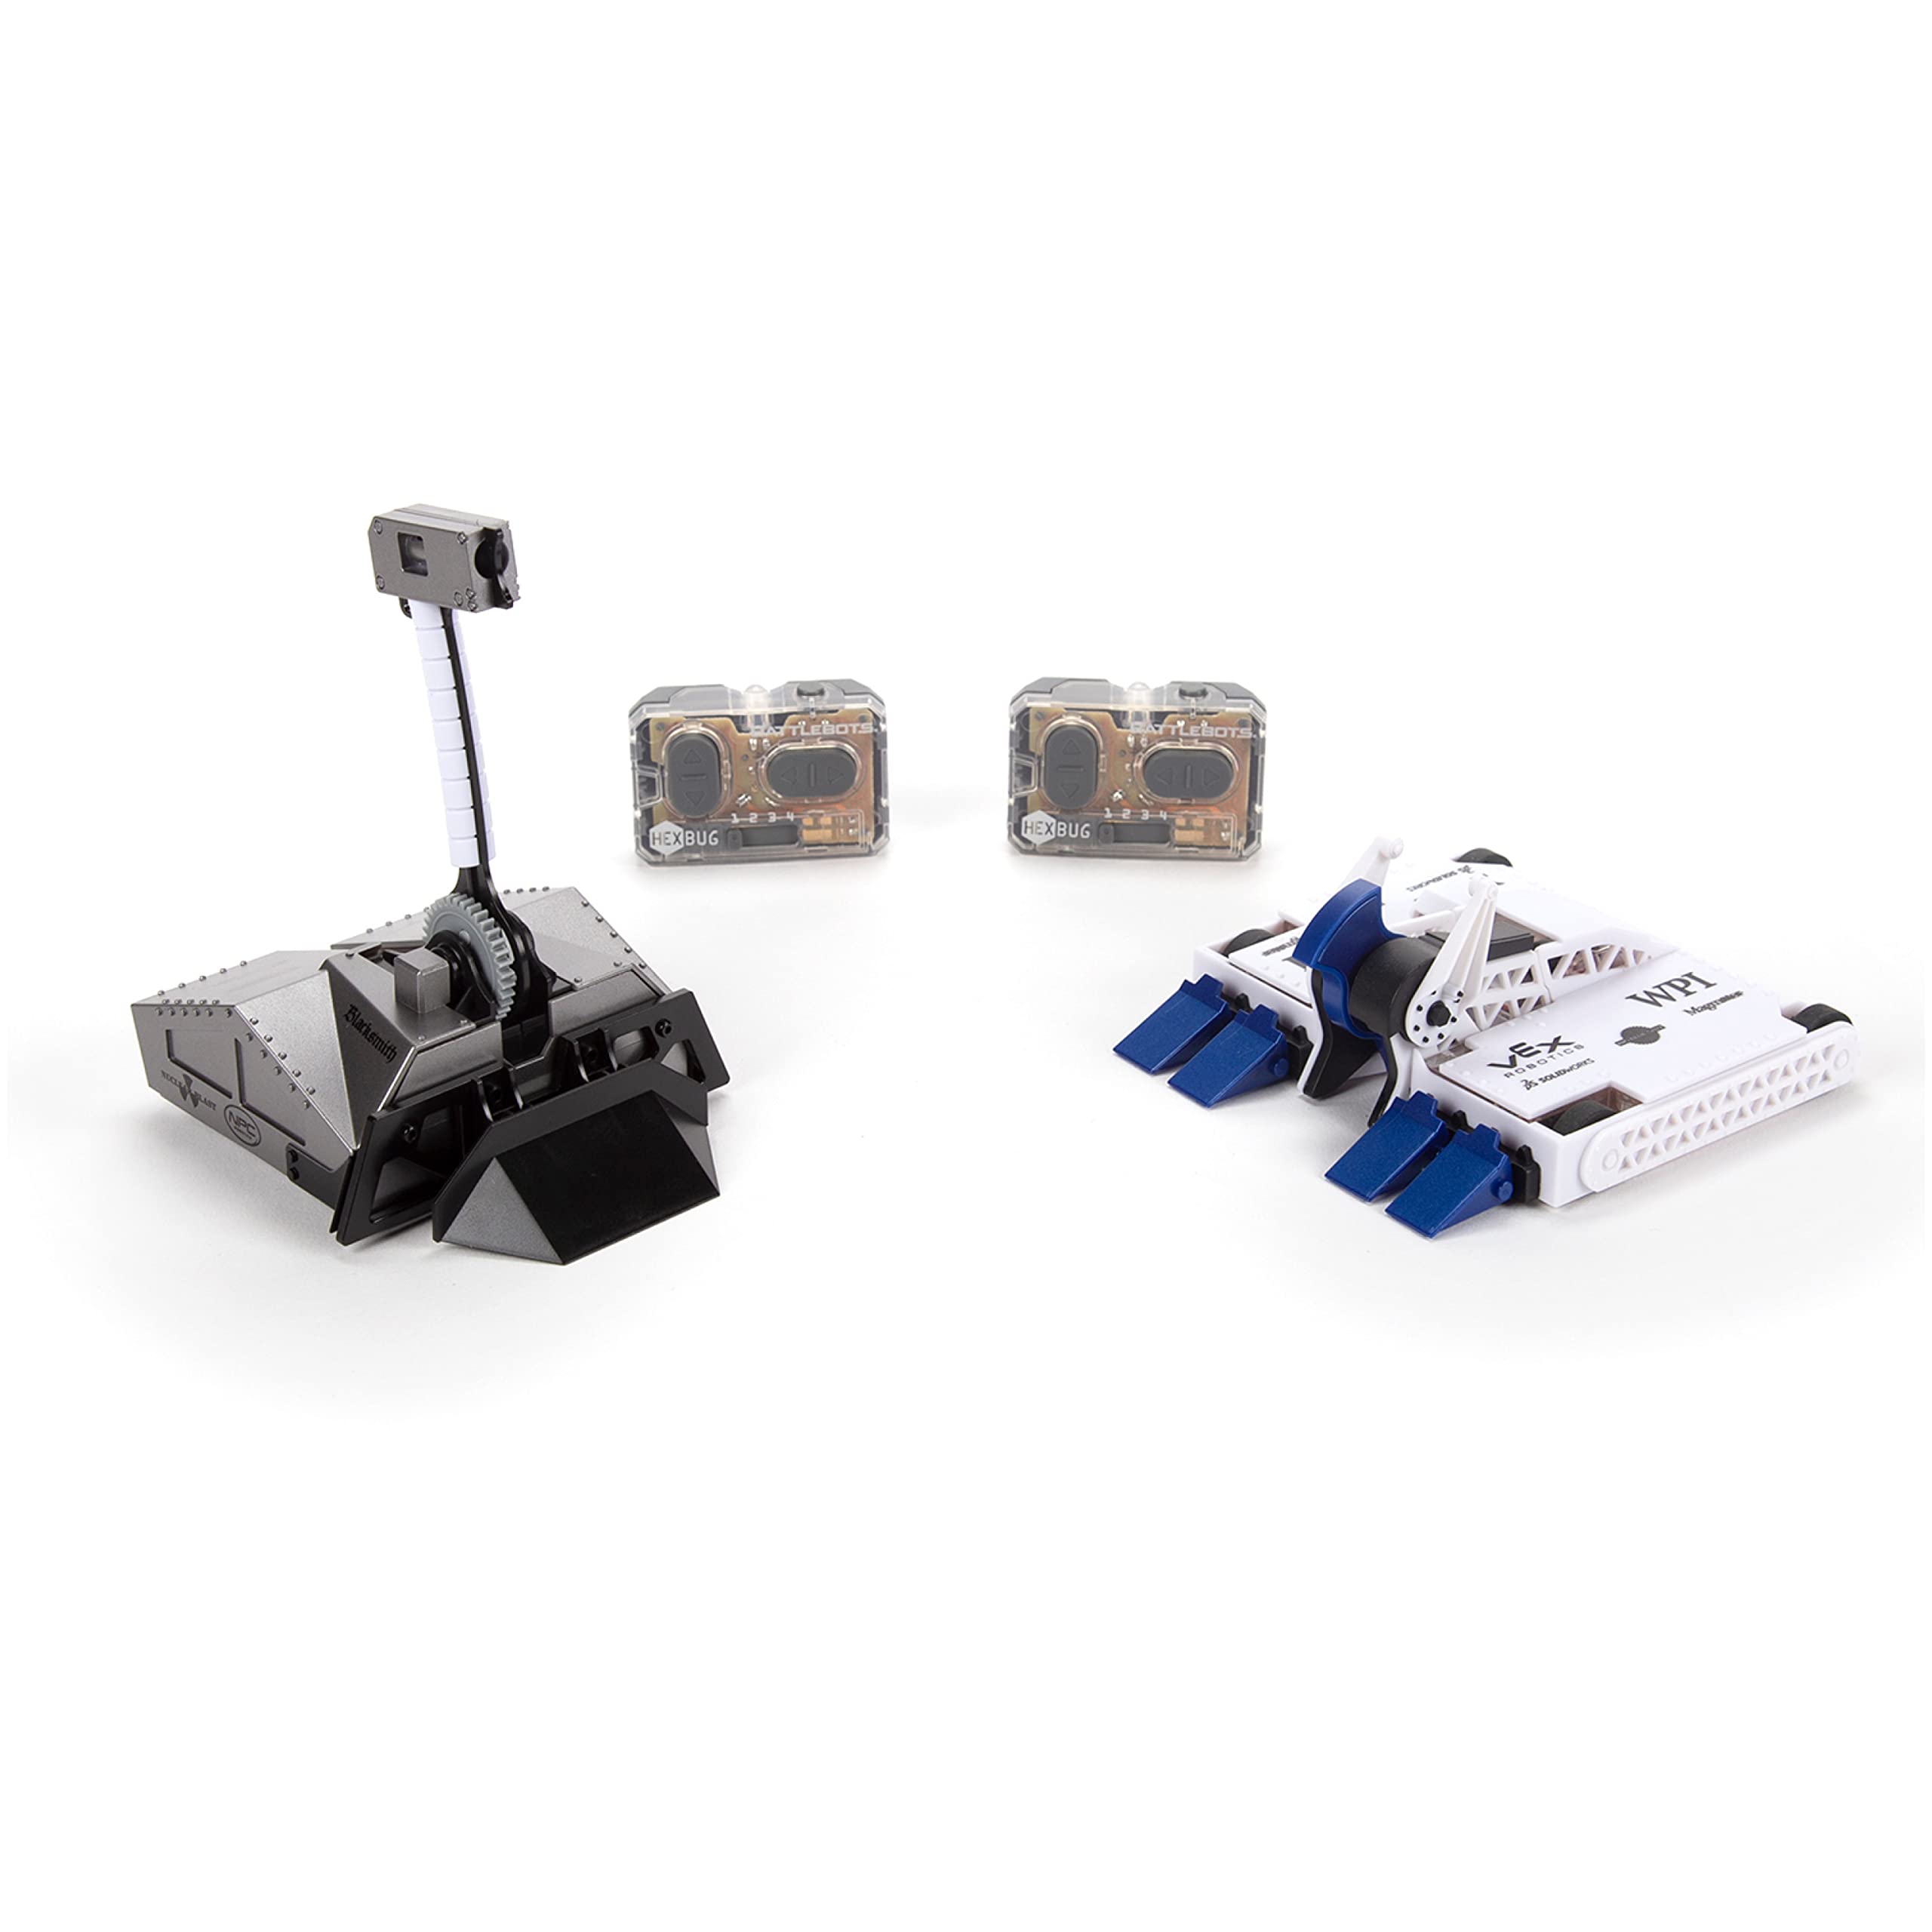 HEXBUG BattleBots Rivals 4.0 (Blacksmith and Biteforce), Remote Control Robot Toys for Kids, STEM Toys for Boys and Girls Ages 8 & Up, Batteries Included